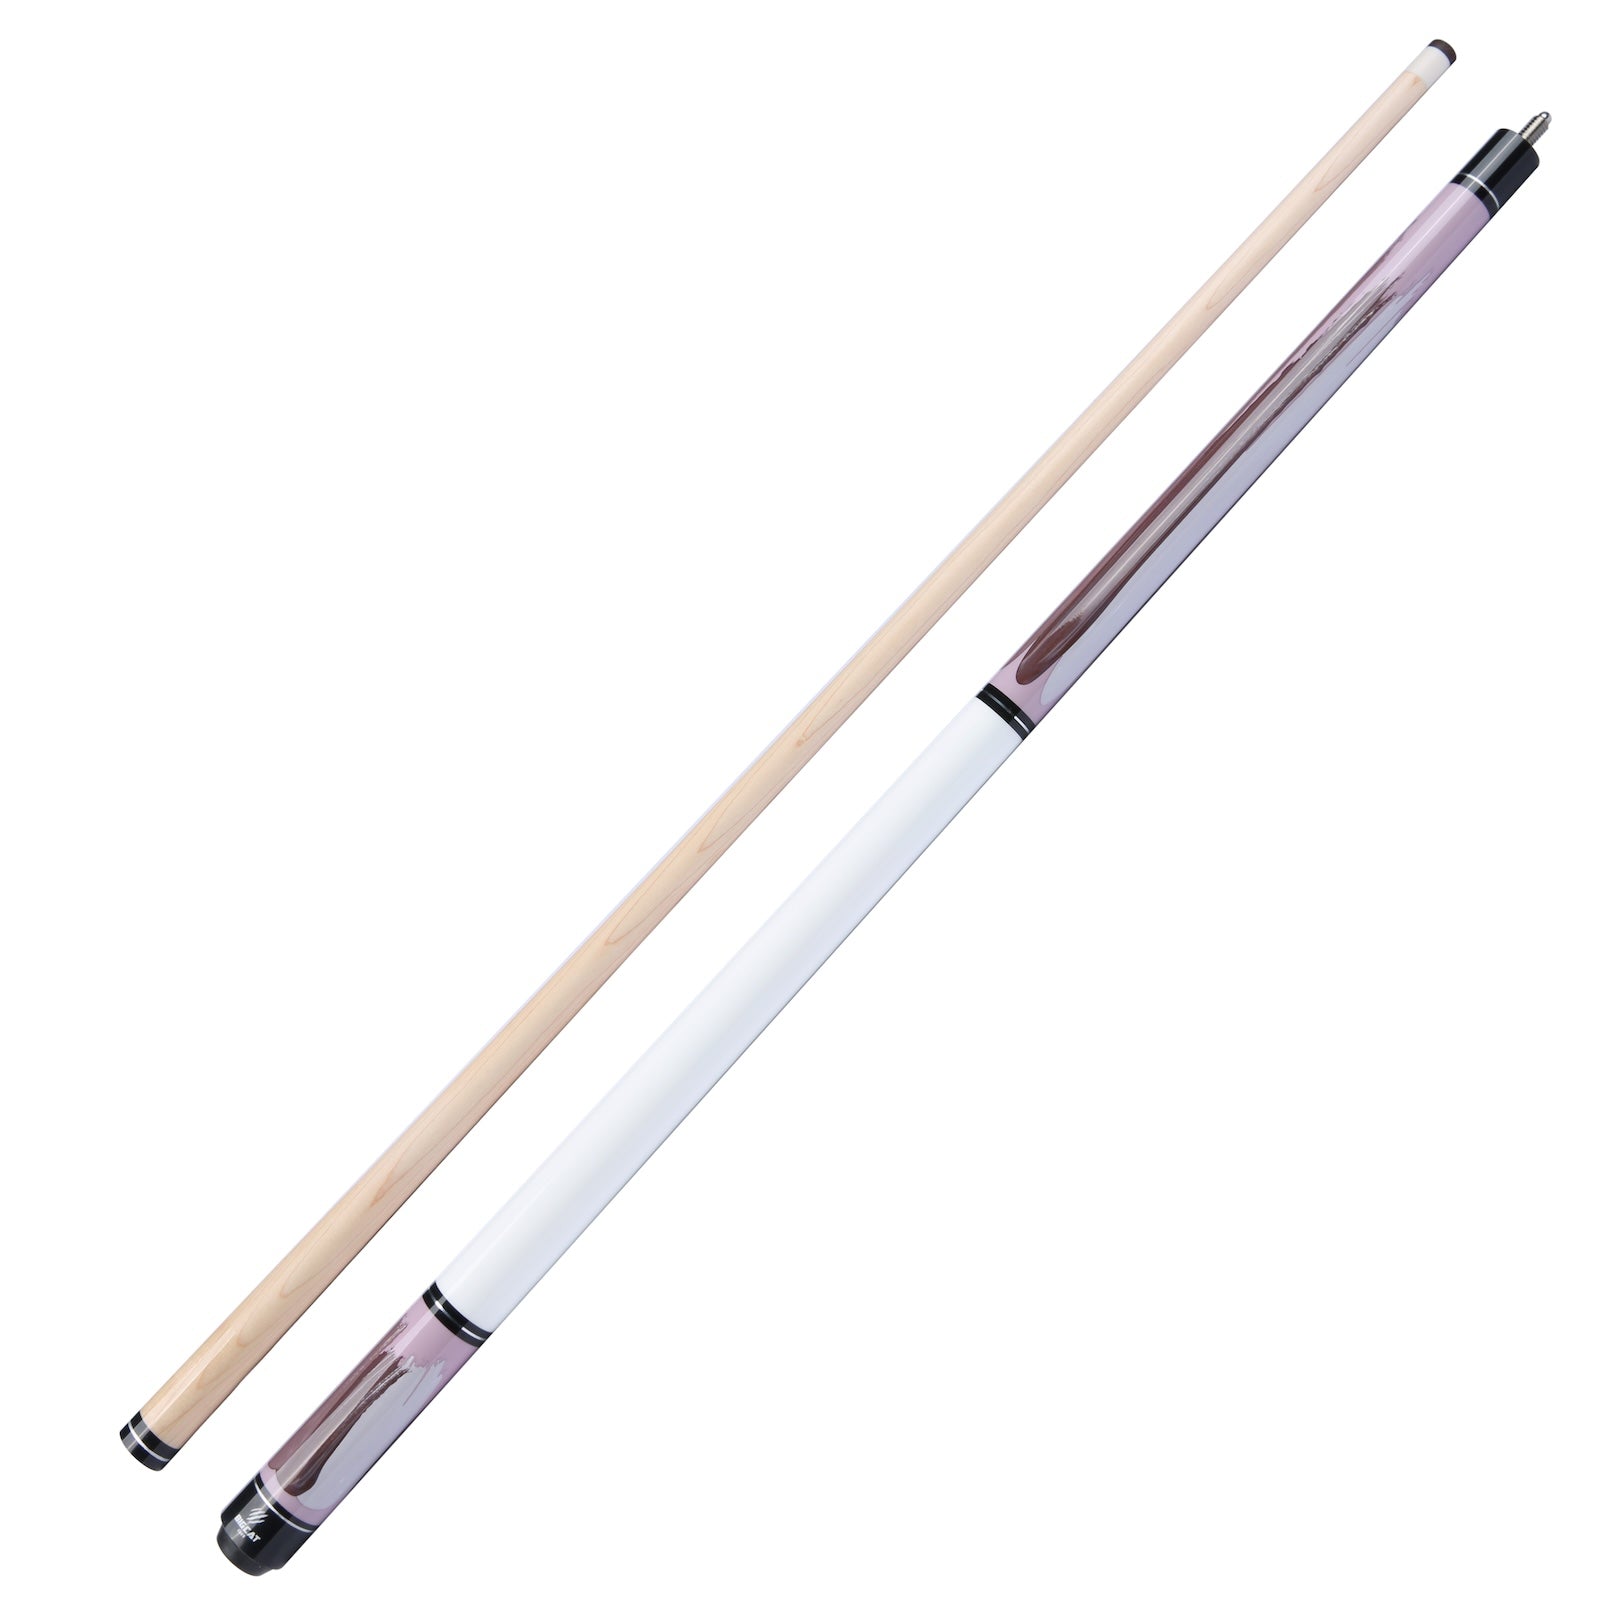 Big Cat Paint IV Regal Amethyst Pool Cue Stick - 18/19/20/21 oz, Big Cat Professional Leather tip, 12.5mm, 58" Length, Billiard Pool Cue Sticks for Men, Ideal for Home or Commercial/Bar Settings, Premium Quality Grade A Canadian Maple